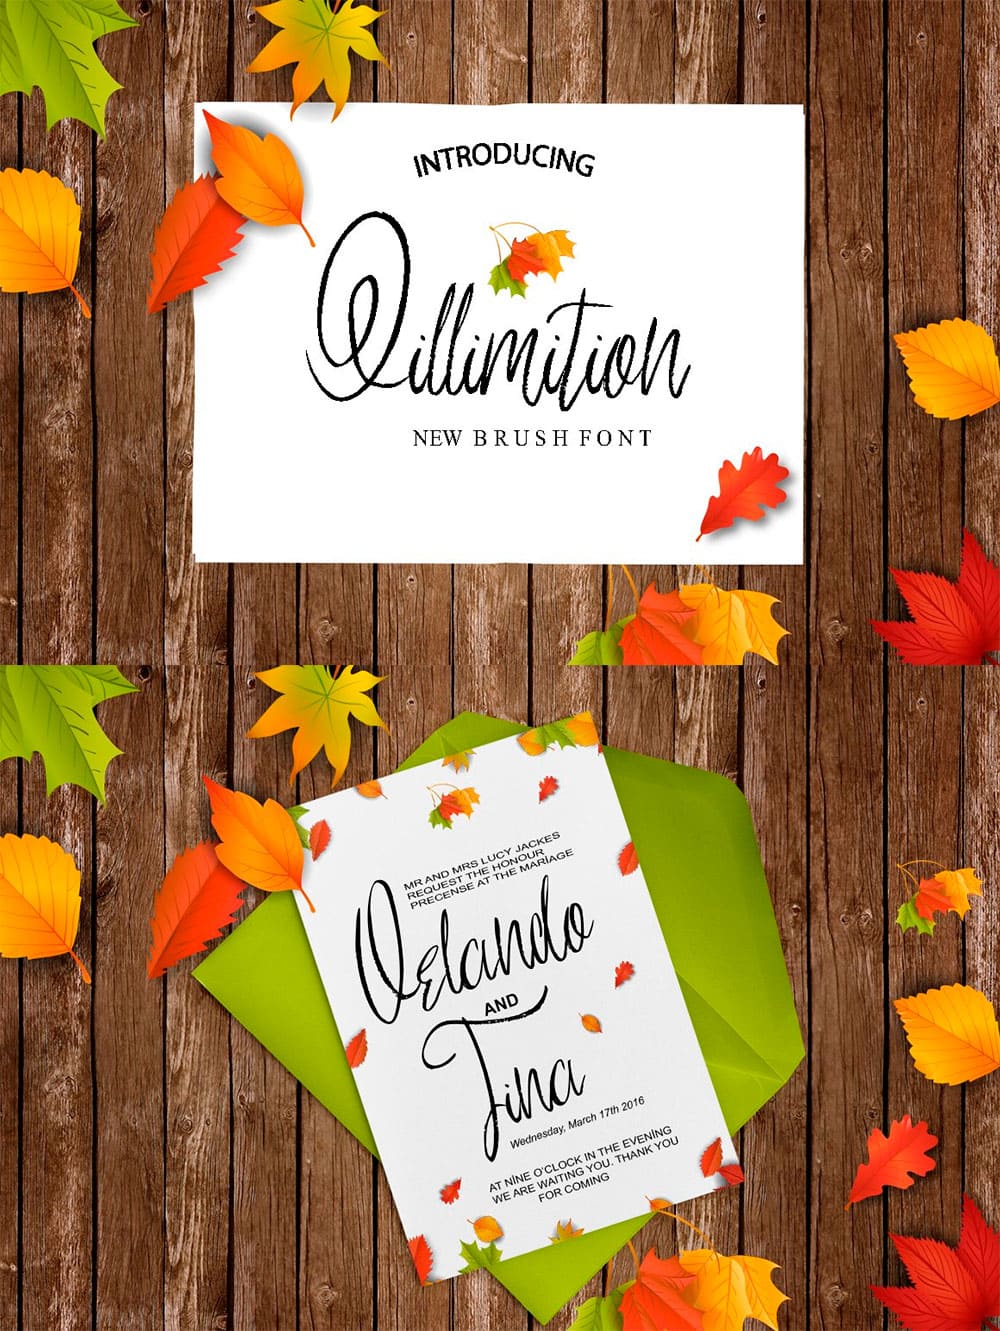 Qillimition - new Brush font, picture for pinterest.